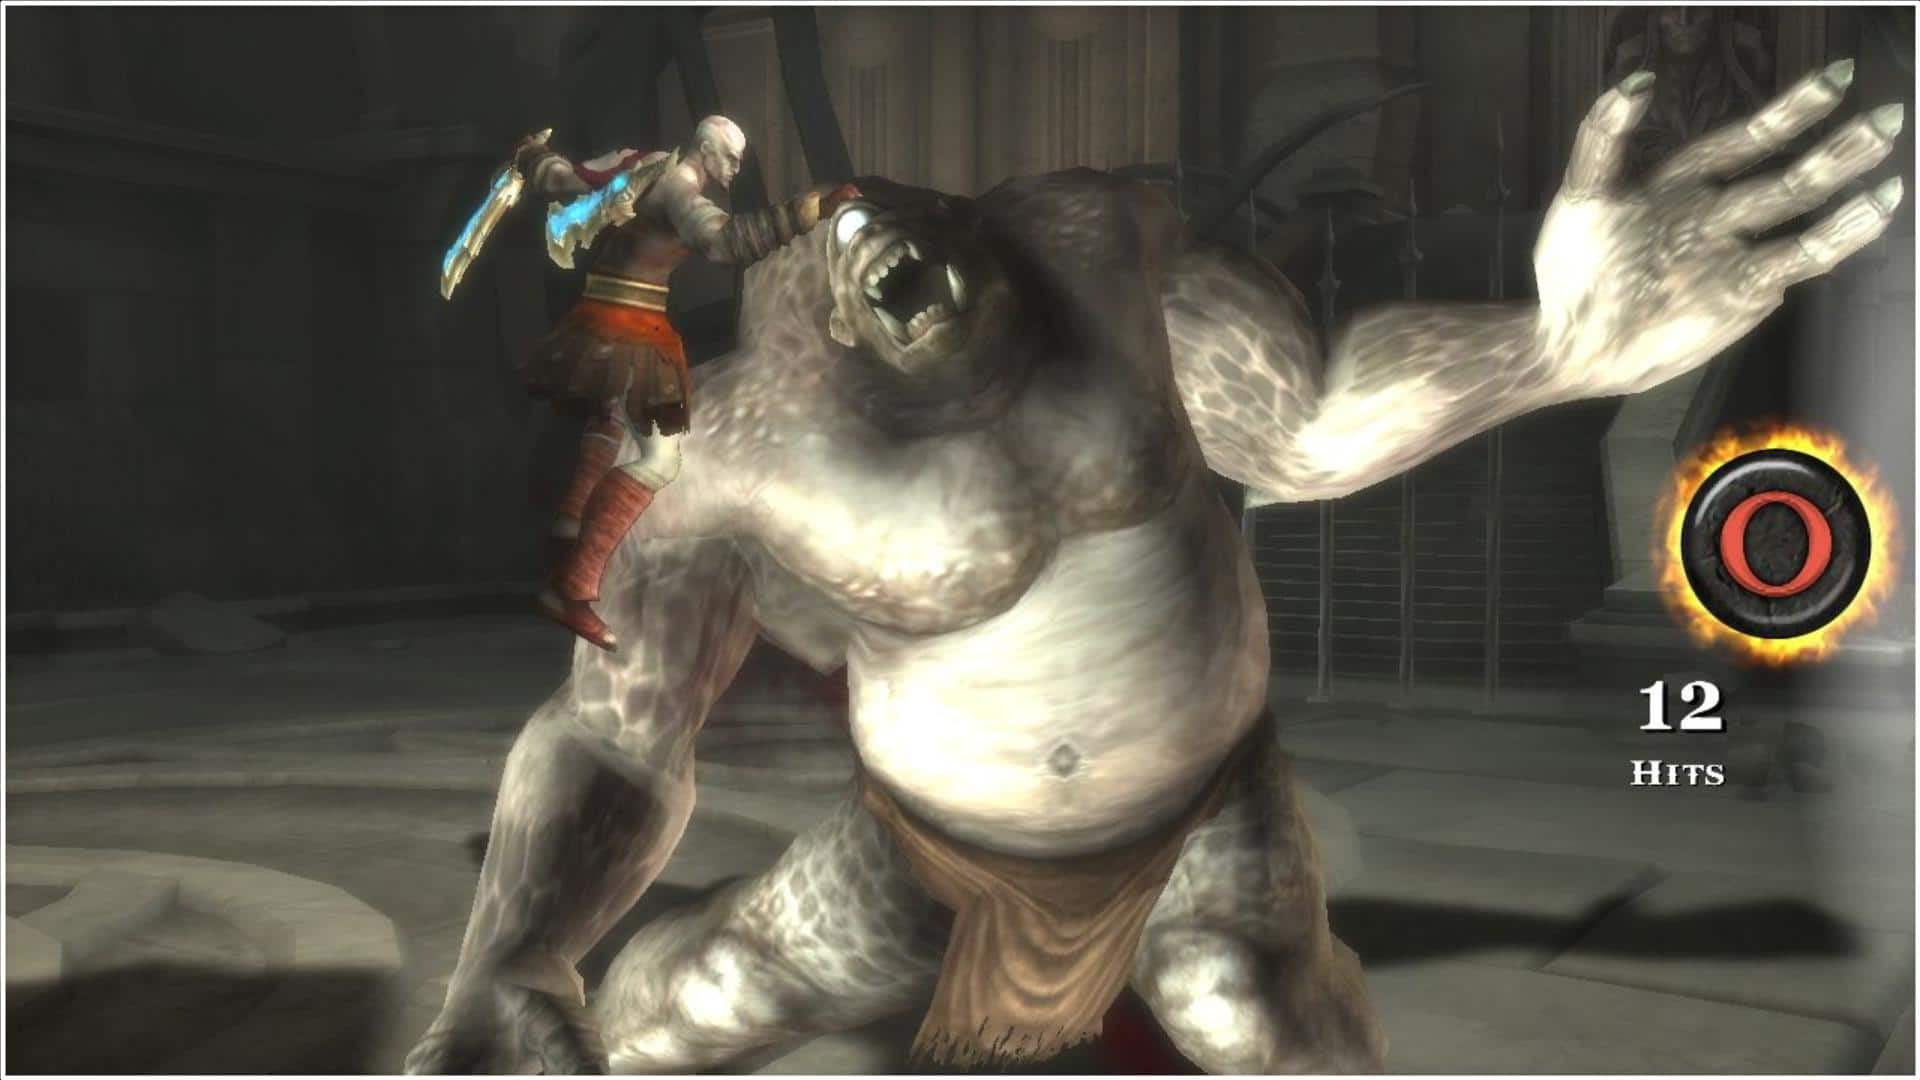 God of War Ghost of Sparta PPSSPP Gold Download for Android & iOS on M